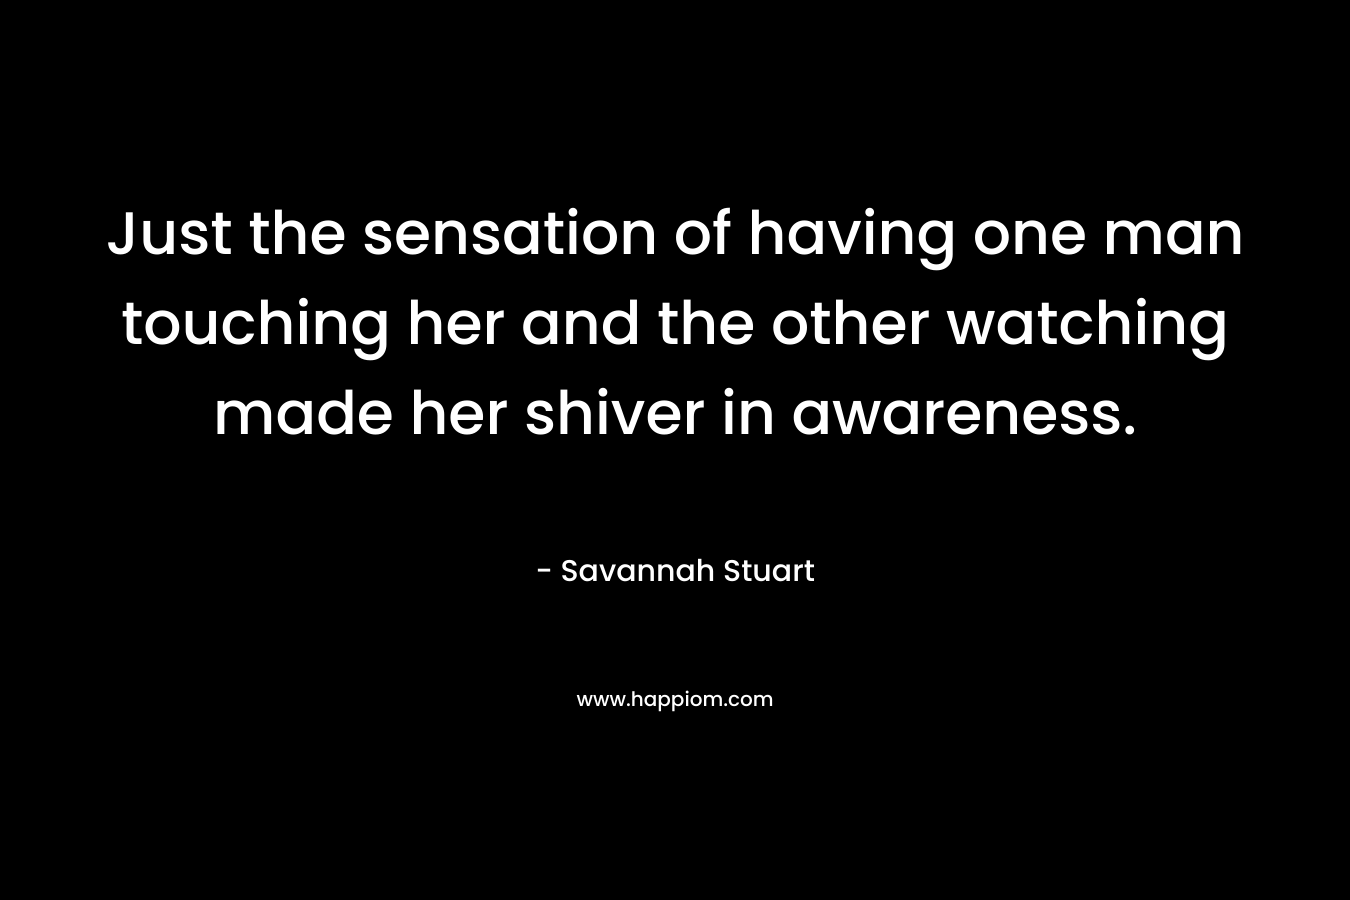 Just the sensation of having one man touching her and the other watching made her shiver in awareness. – Savannah Stuart